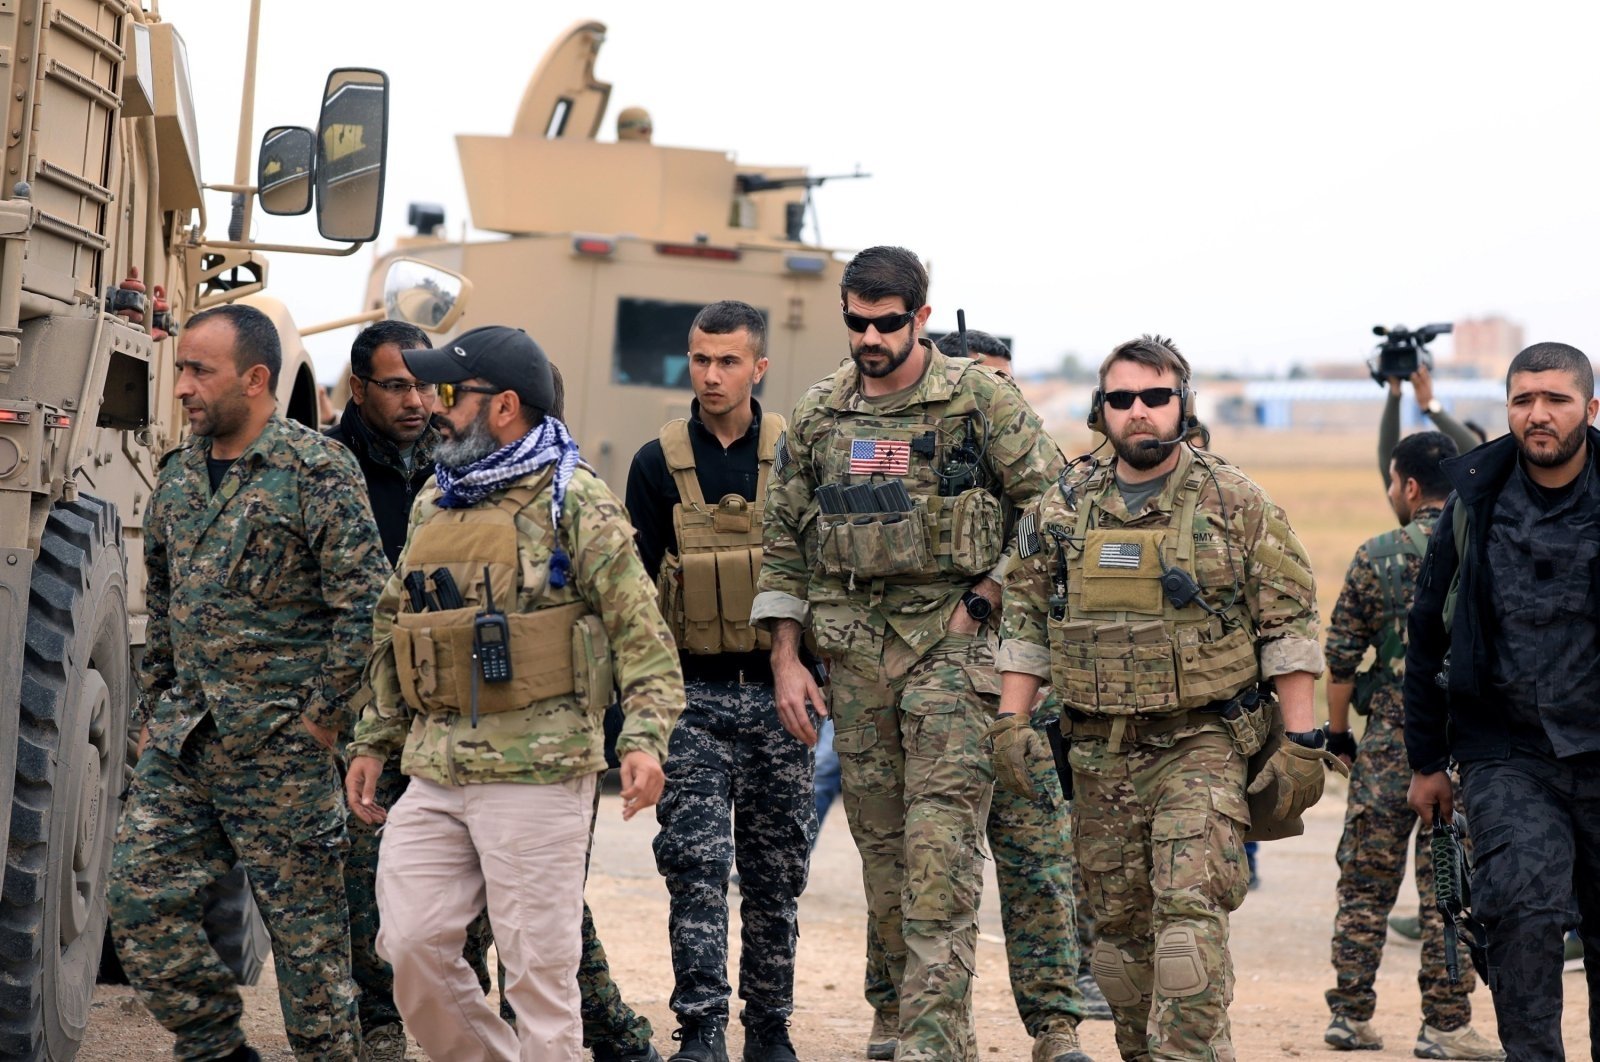 YPG terrorists and U.S. troops are seen together during a joint patrol near the Turkish border in Hassakeh, northeastern Syria, Nov. 4, 2018. (Reuters File Photo)